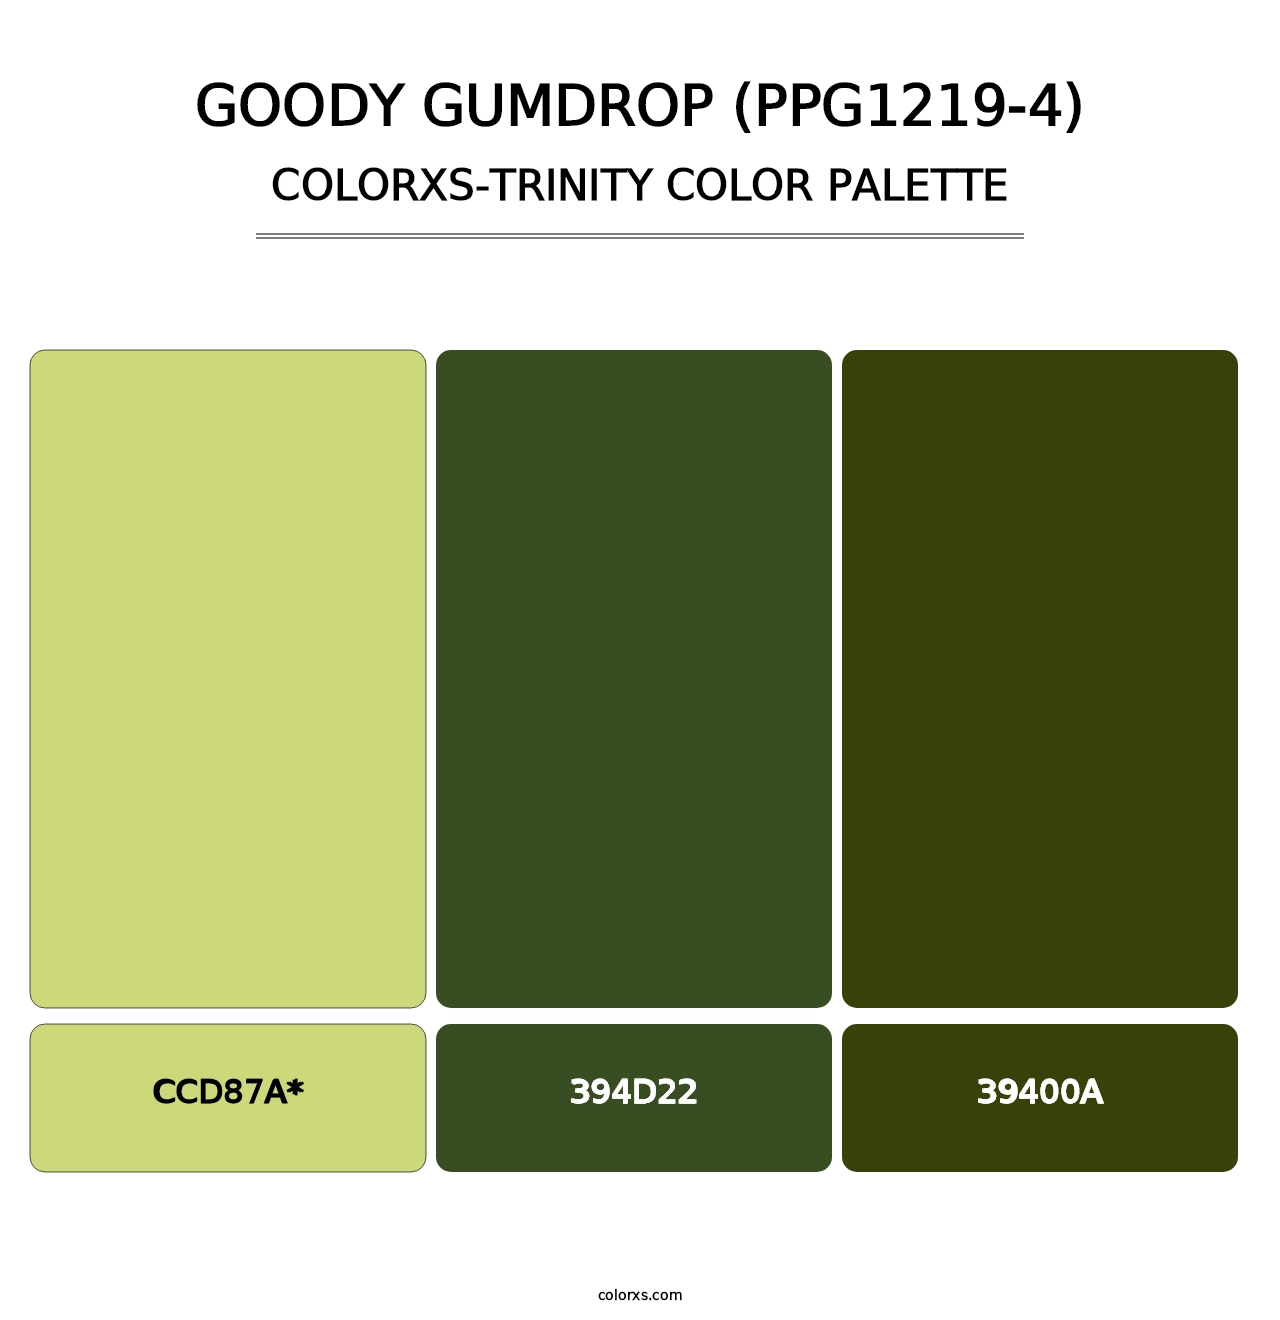 Goody Gumdrop (PPG1219-4) - Colorxs Trinity Palette